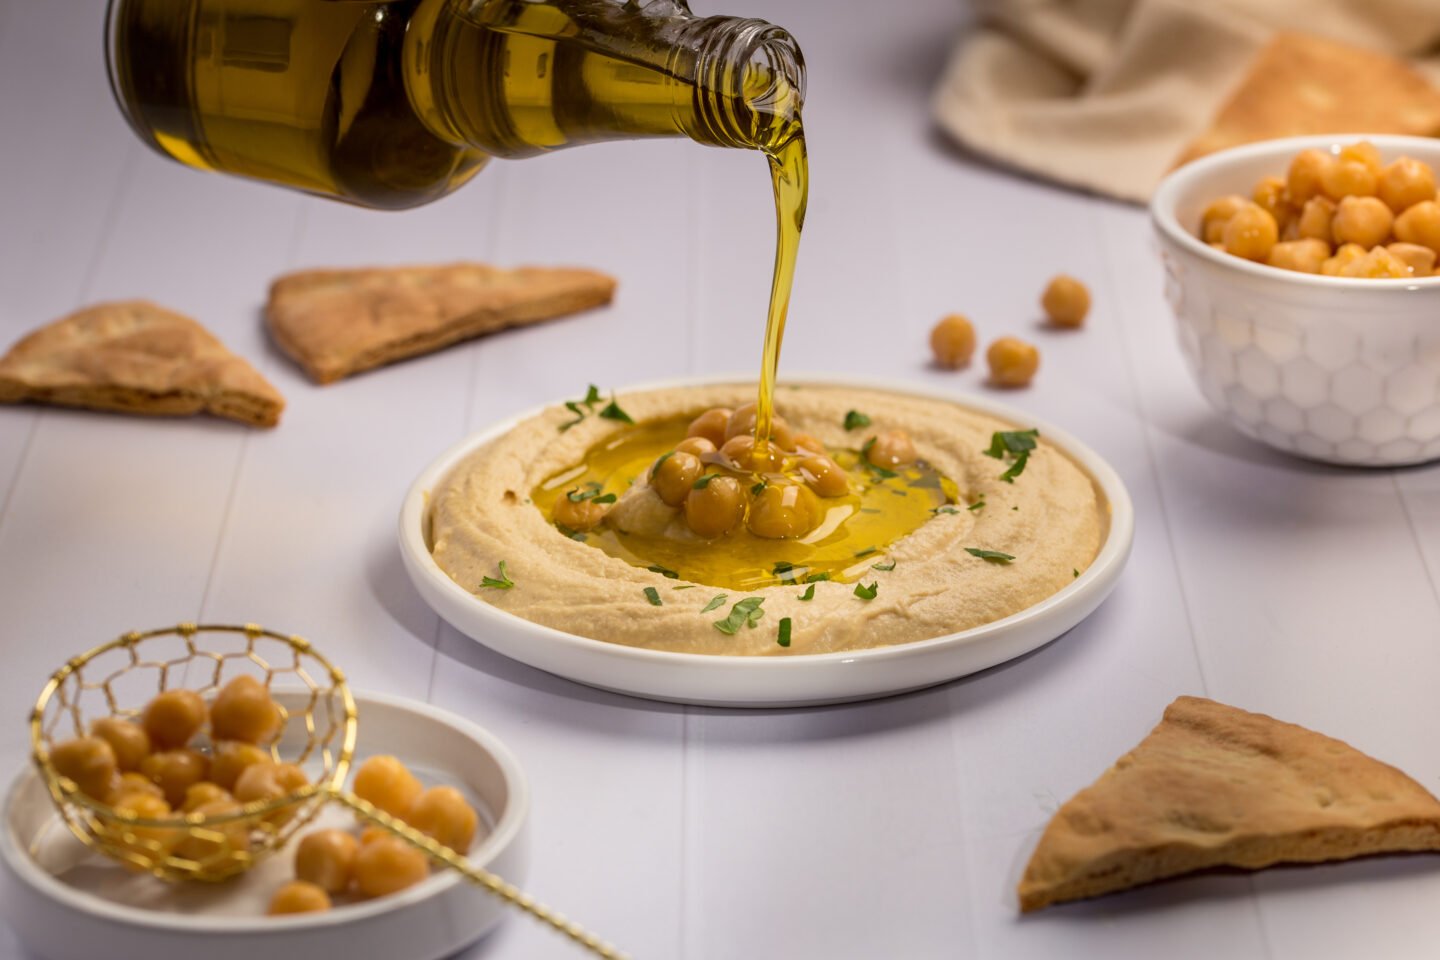 Pouring,Olive,Oil,On,Hummus,Plate